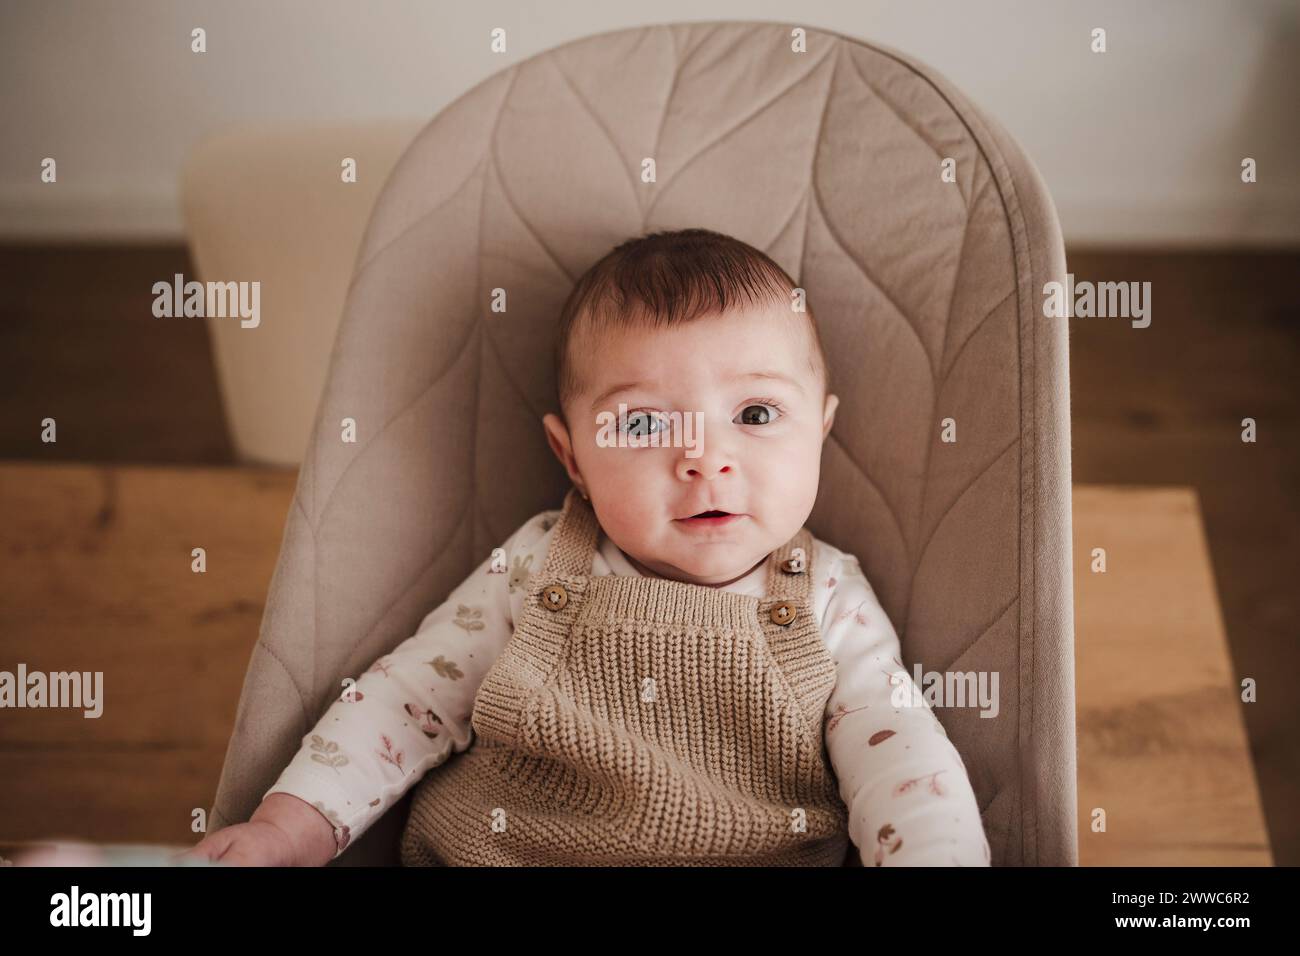 Smiling baby girl sitting on bouncer chair Stock Photo